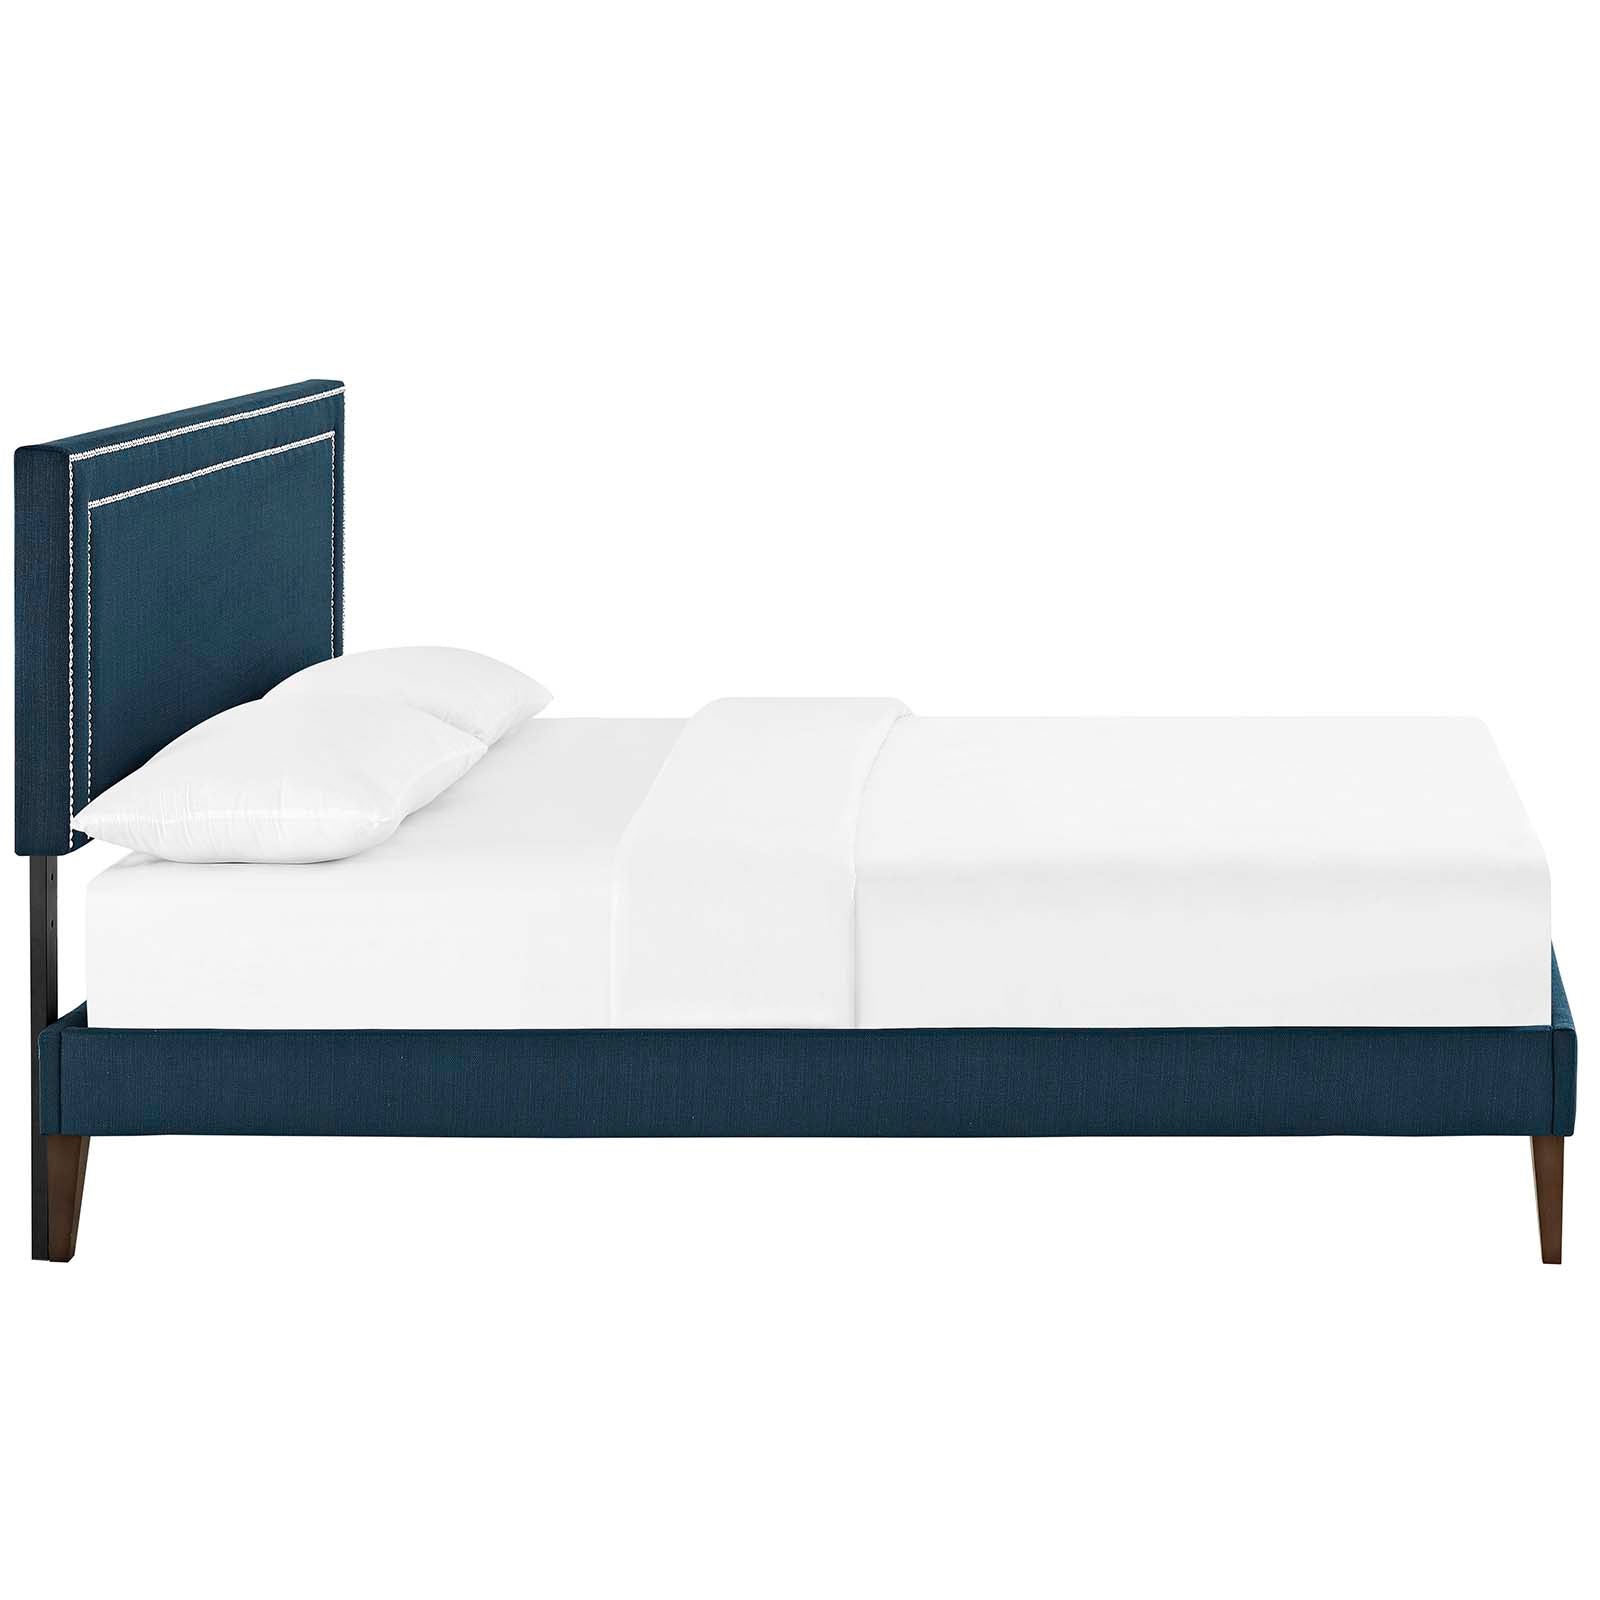 Virginia Full Fabric Platform Bed with Squared Tapered Legs